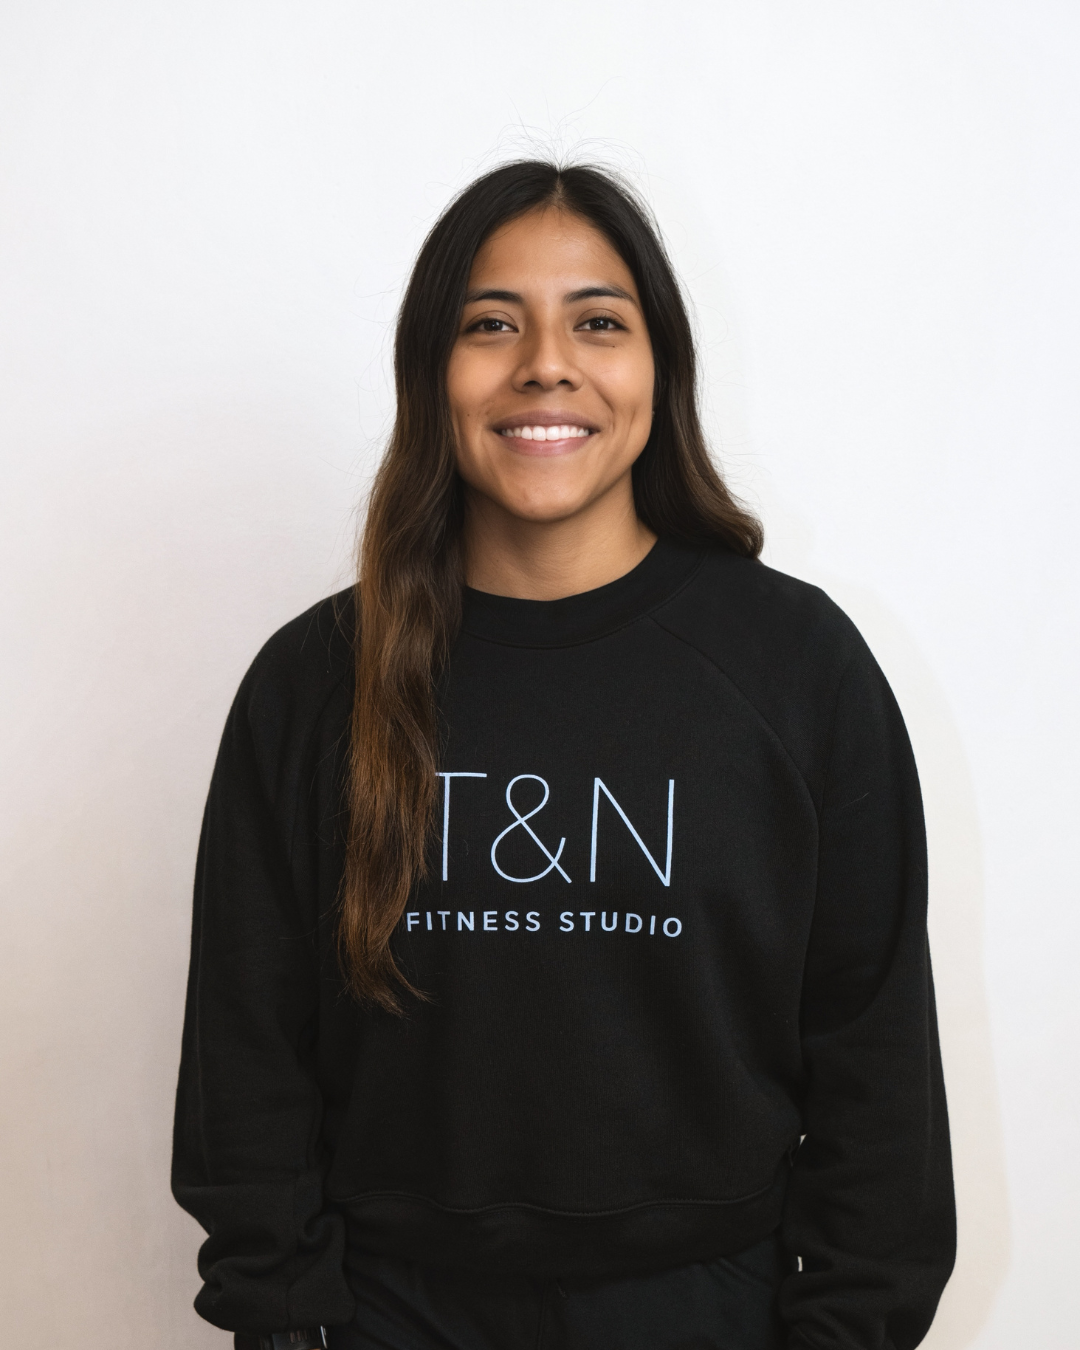 A woman wearing a black sweatshirt with the words t & n fitness studio is part of a Team.